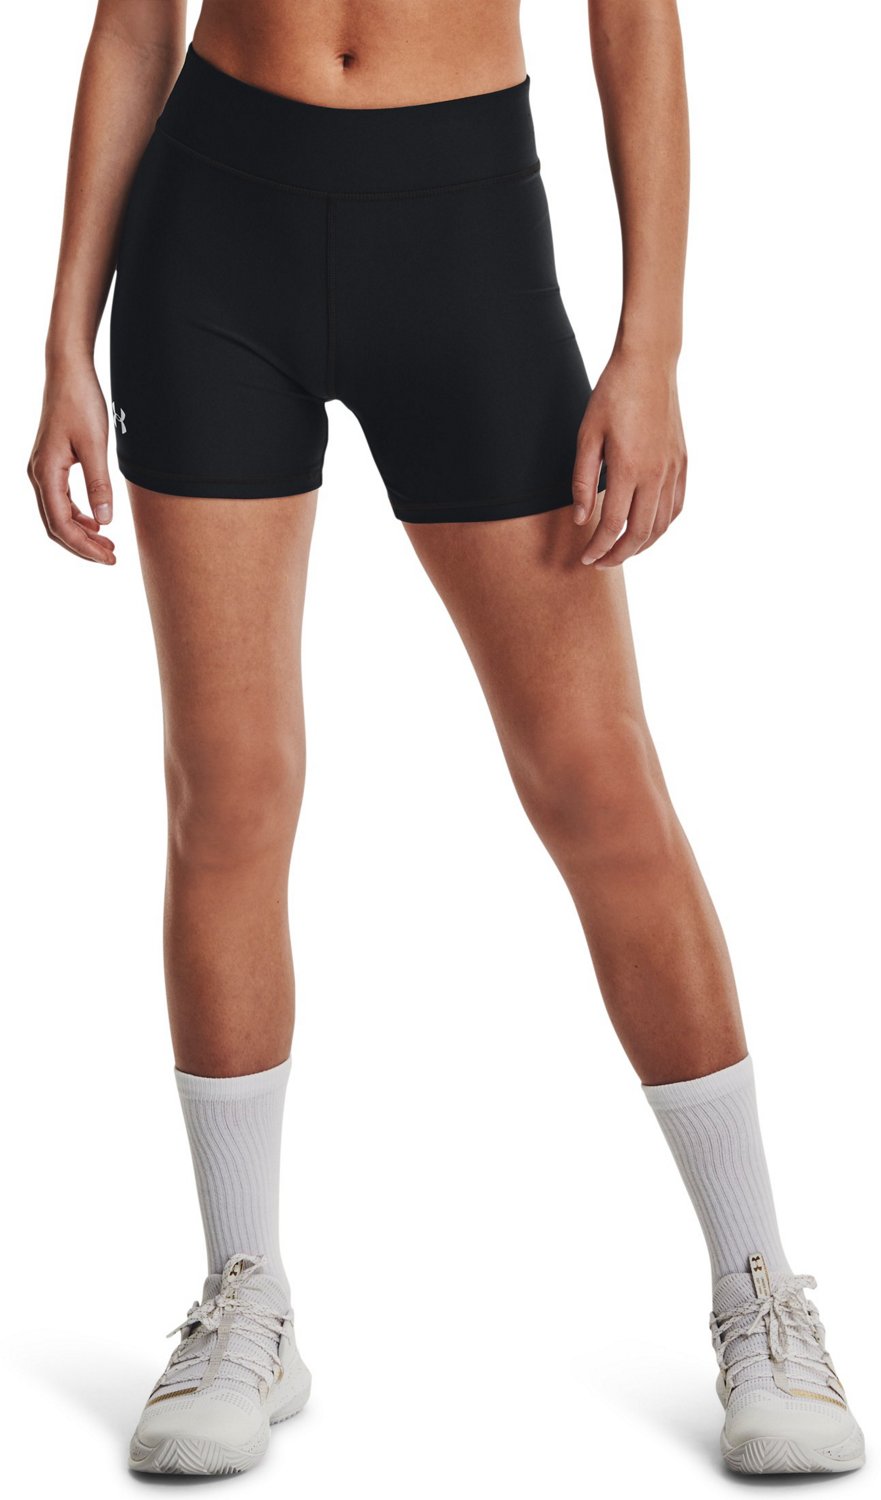 Under Armour Womens Team Shorty Shorts 4 in